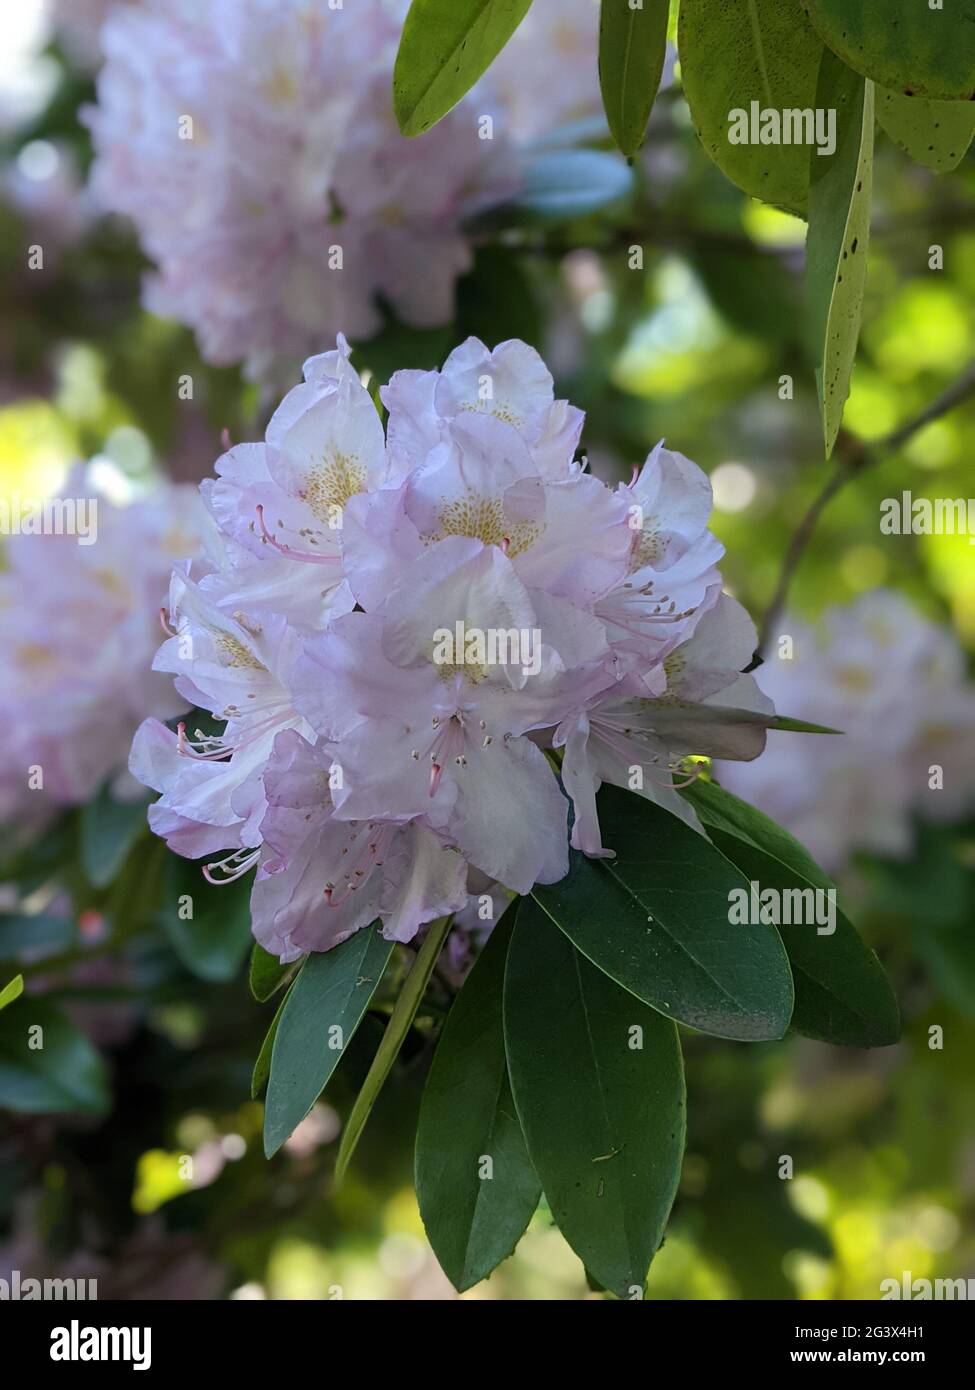 Close-up view of a blossoming white rhododendron. Nahansicht eines blühenden Rhododendrons. Stock Photo